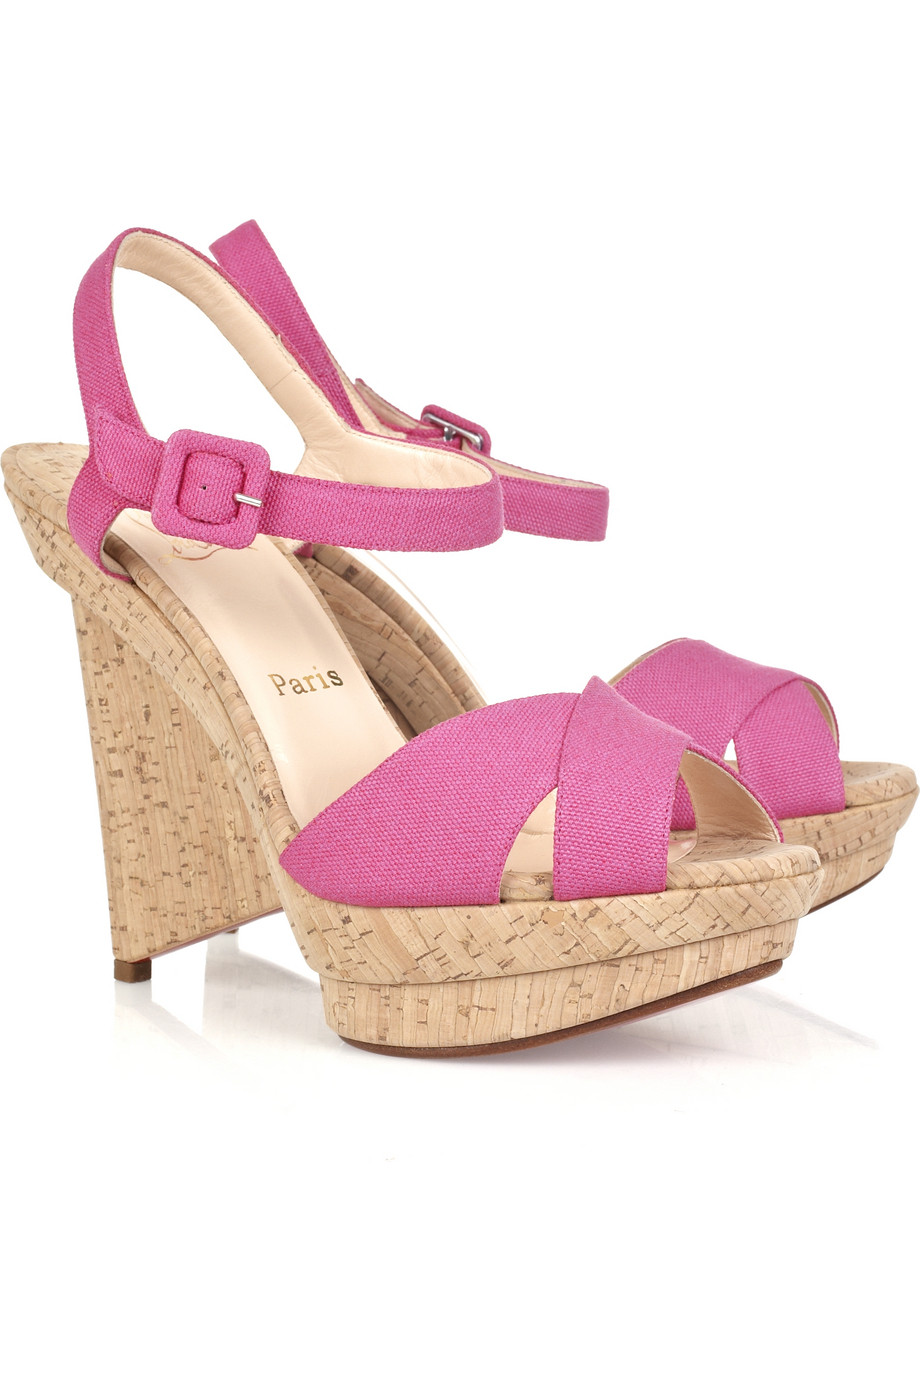 Christian Louboutin Lafalaise 100 Cork Wedge Sandals in Pink | Lyst